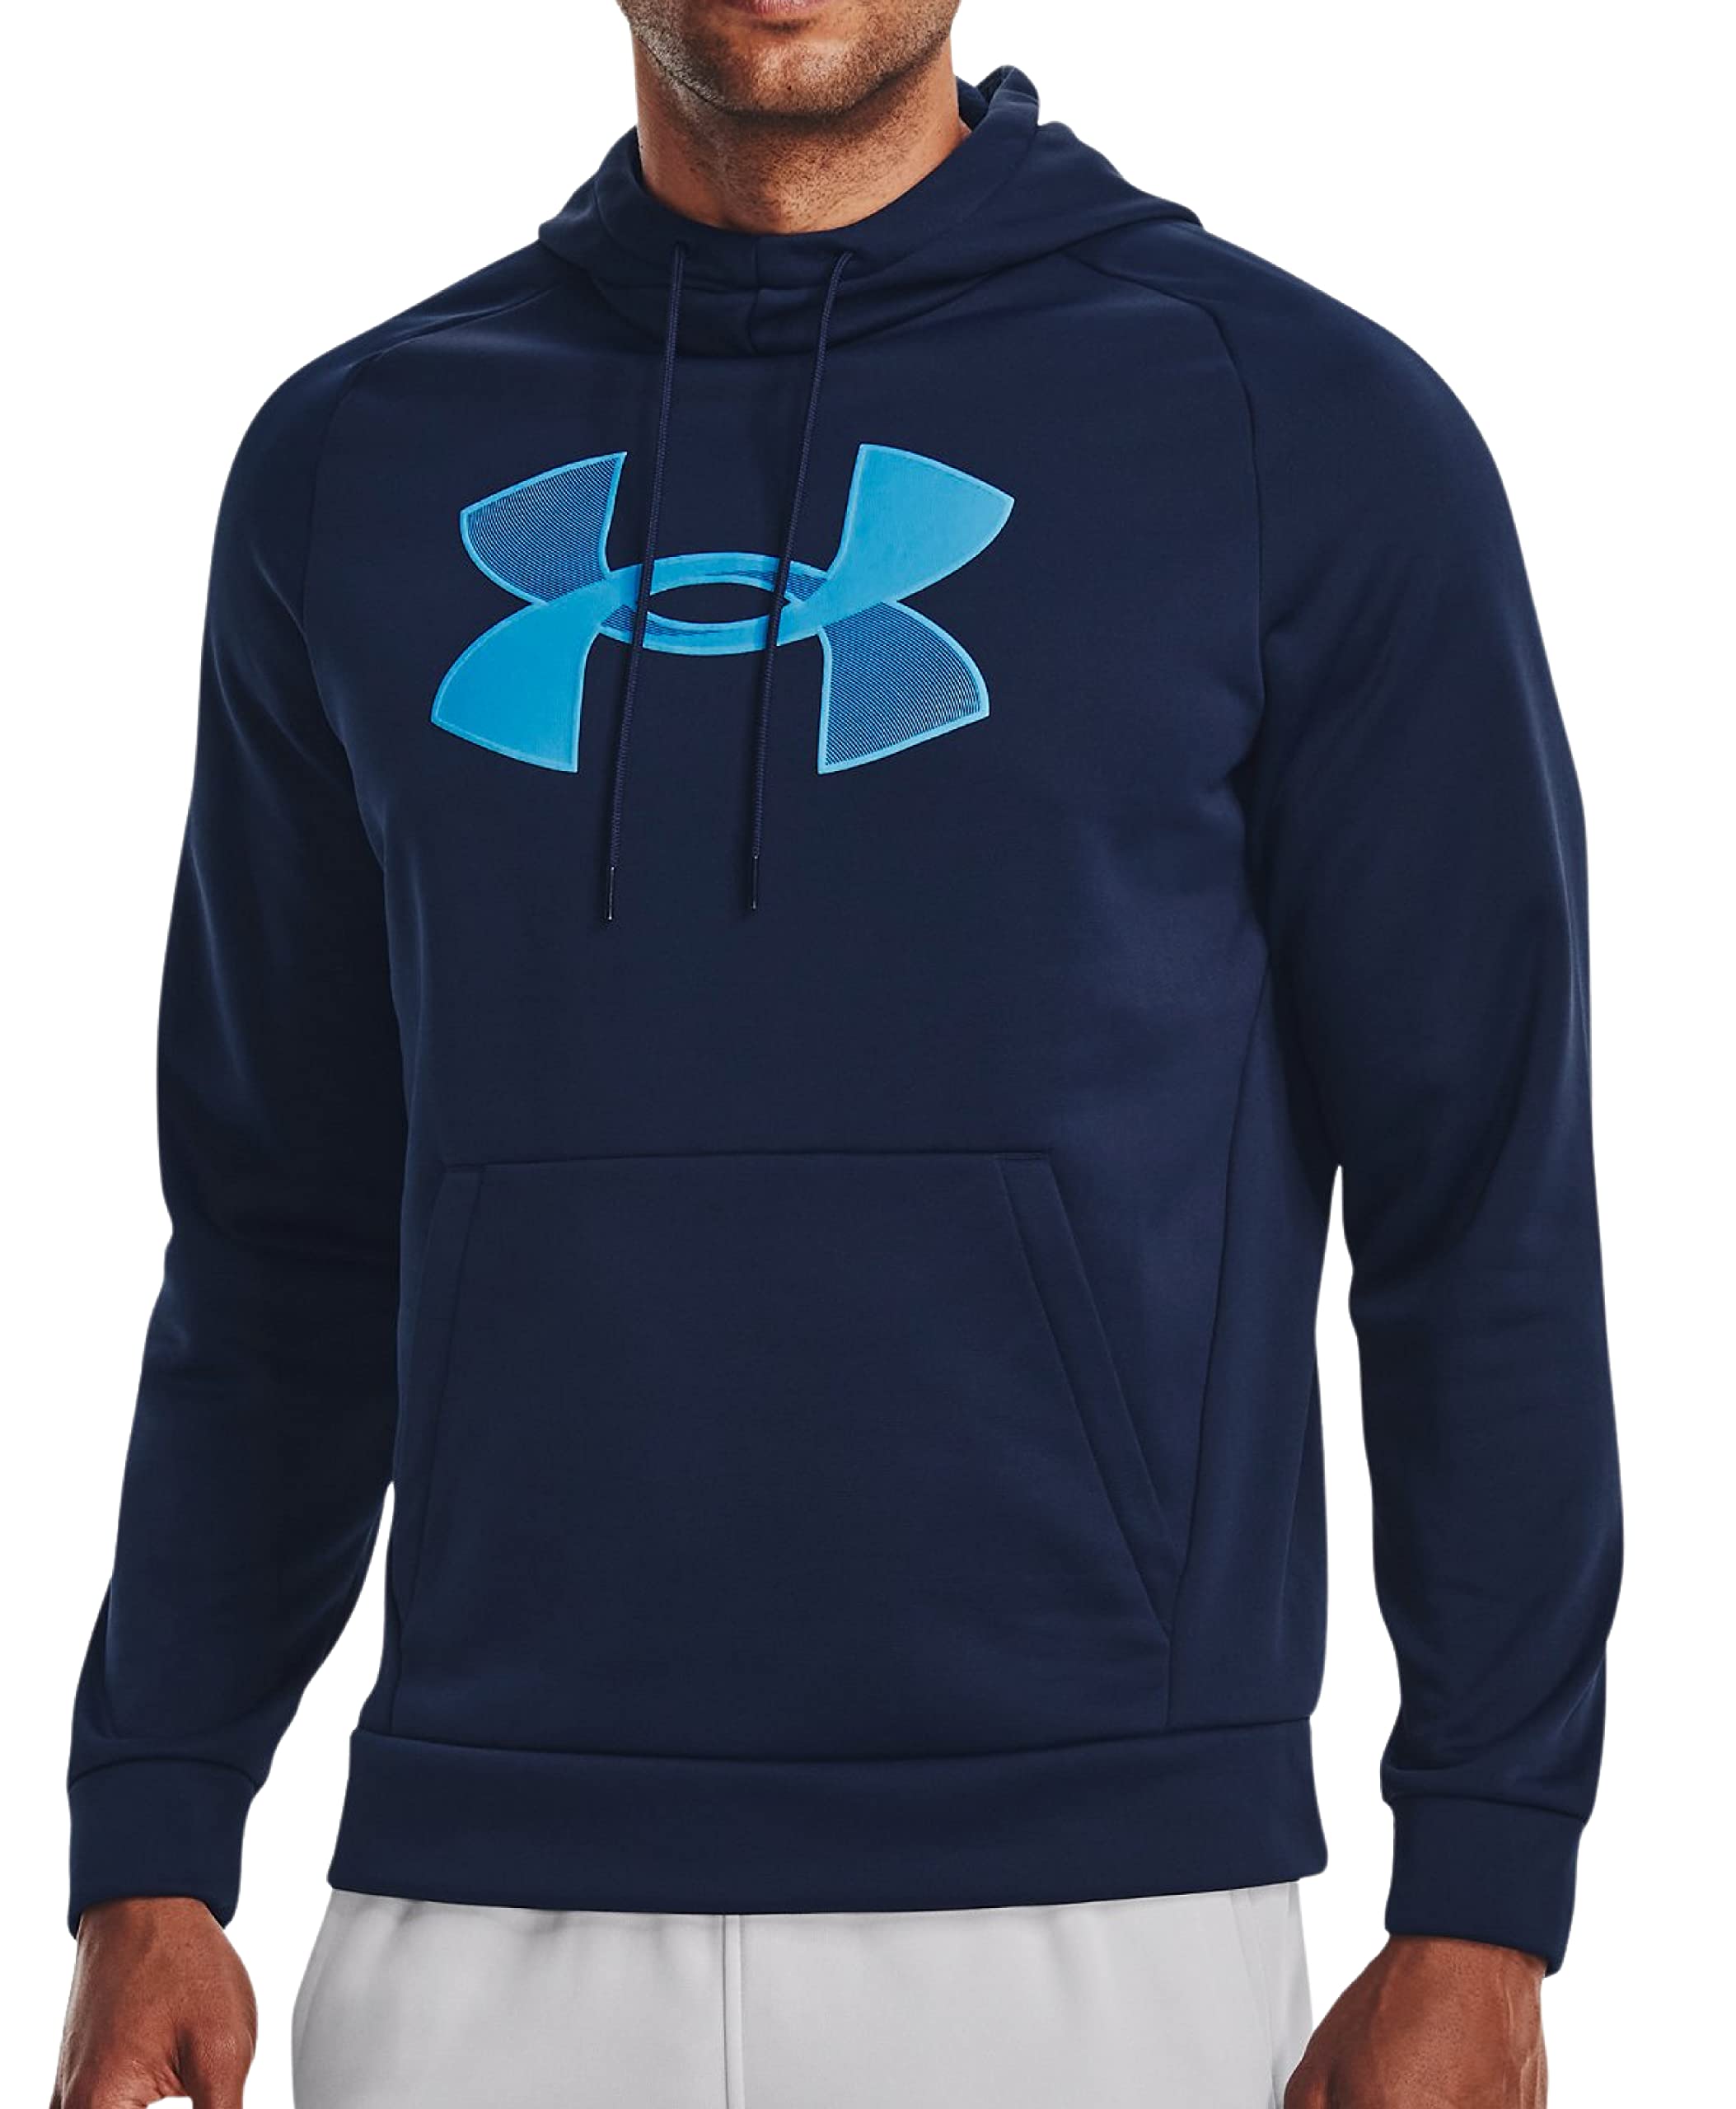 Under Armour Hoodies for sale in Mountain View, California